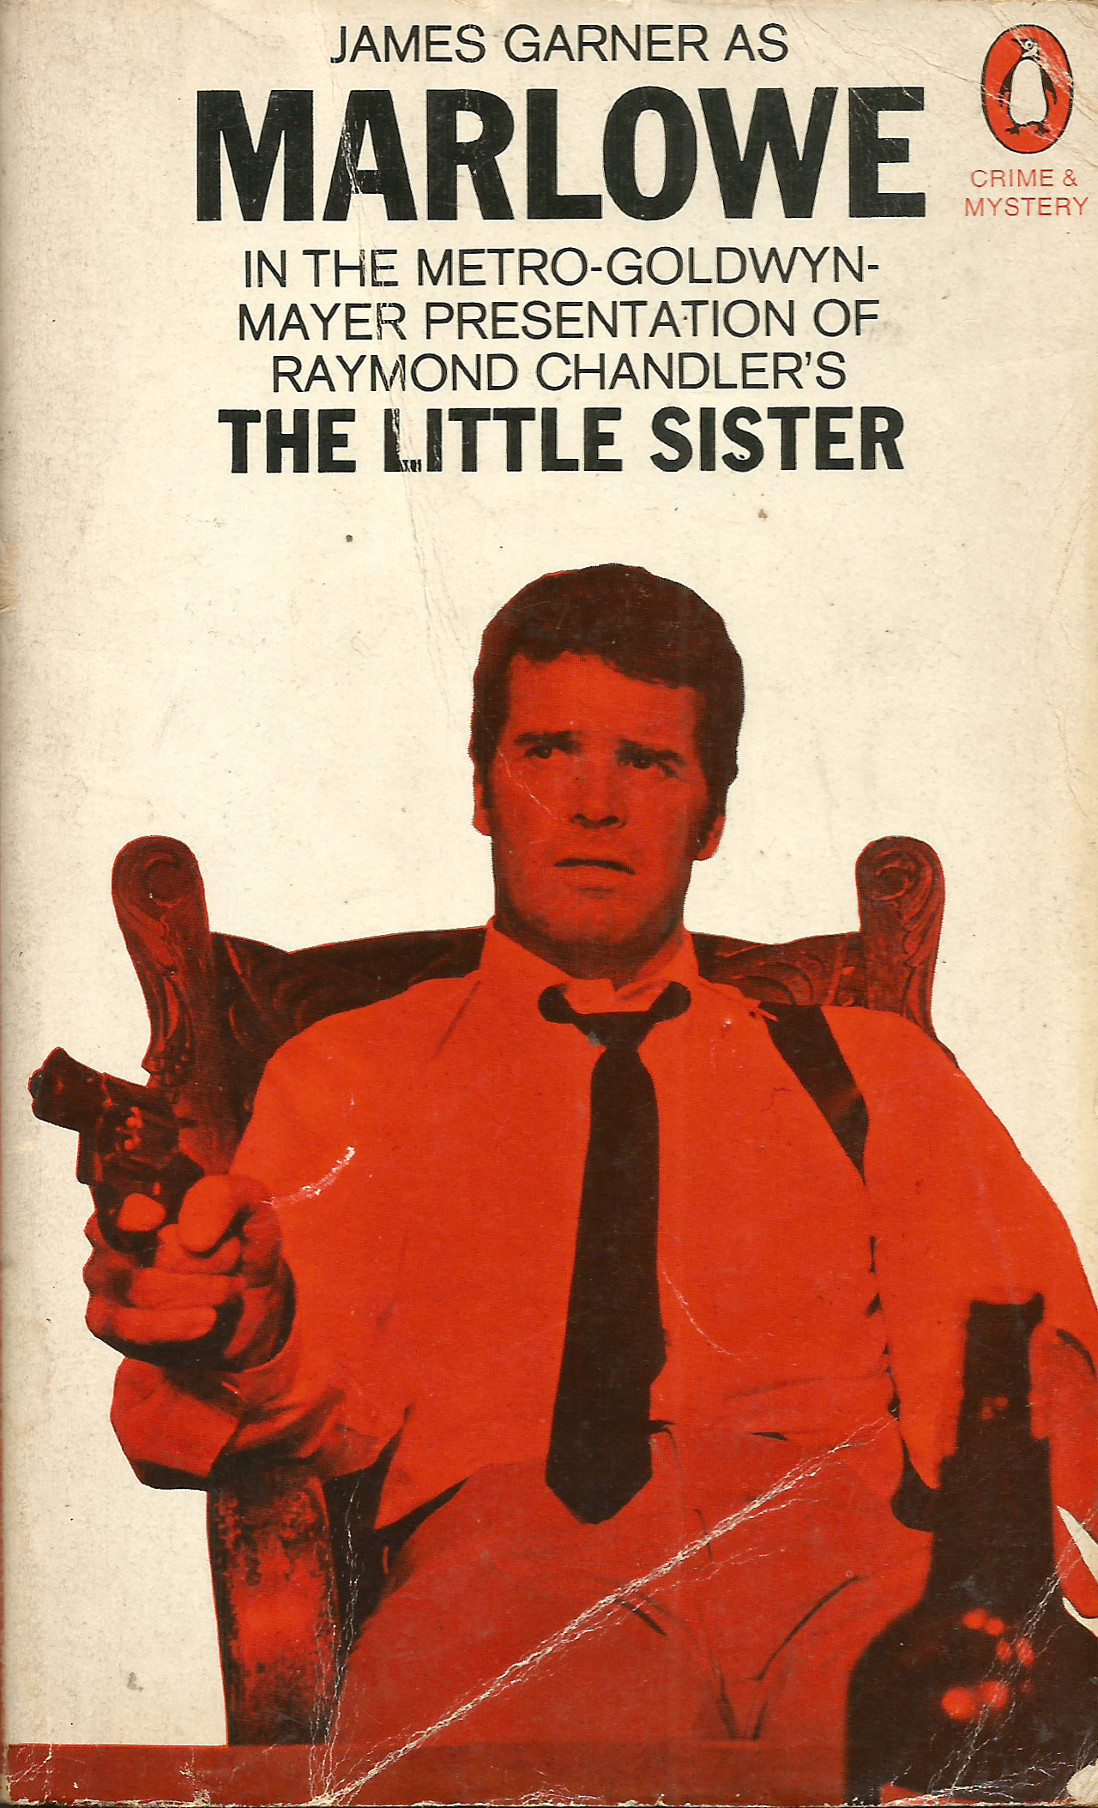 The Little Sister, by Raymond Chandler (Penguin, 1969). From a charity shop in Canterbury.